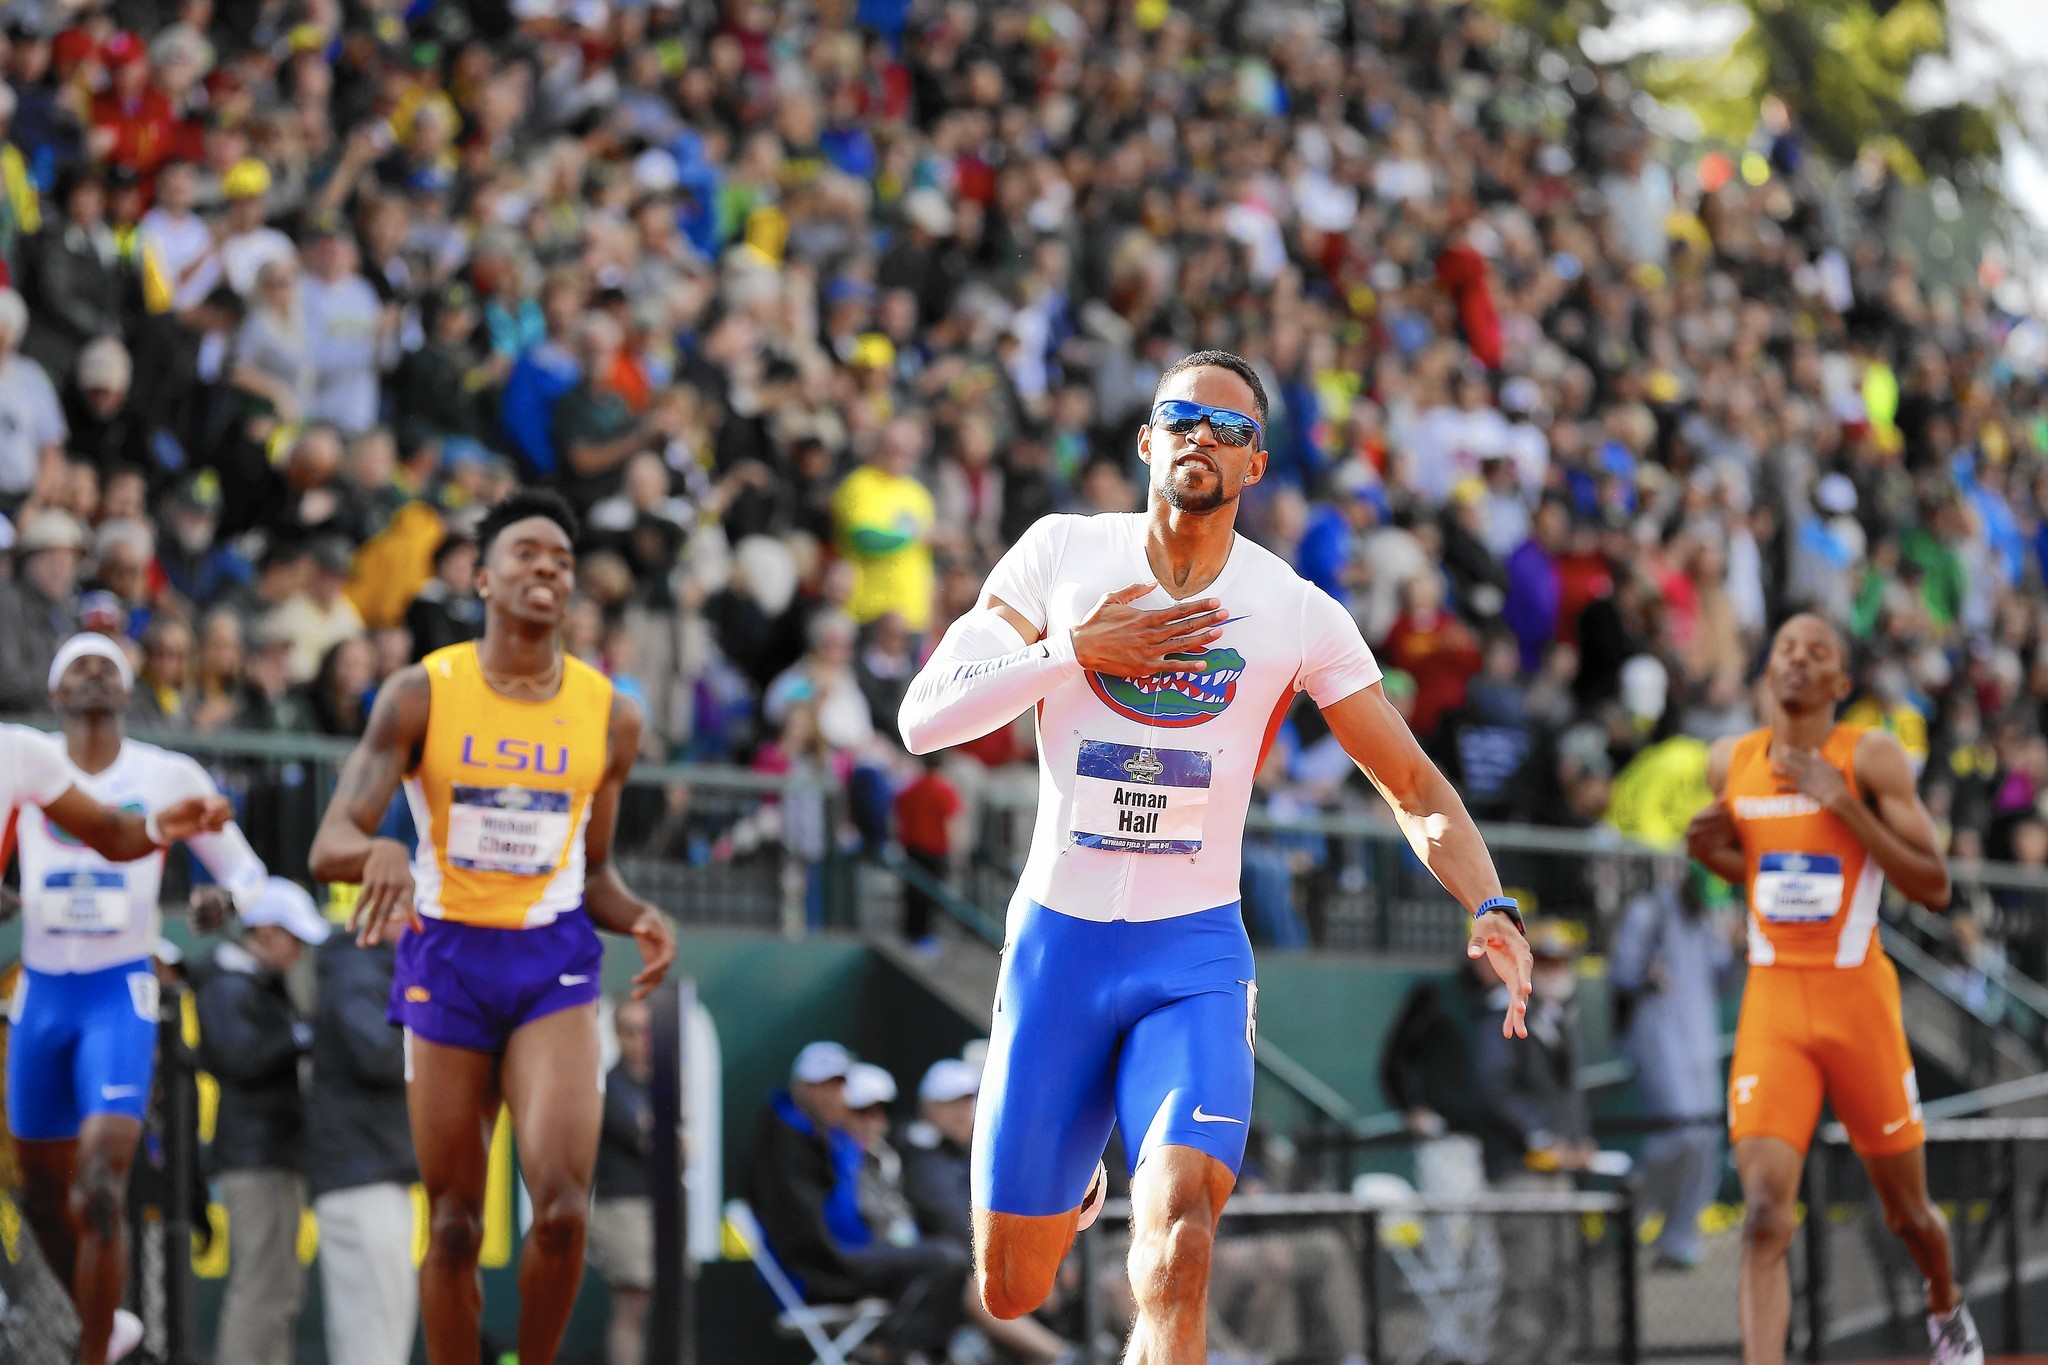 Gators eager to make mark on U.S. Olympic track and field trials